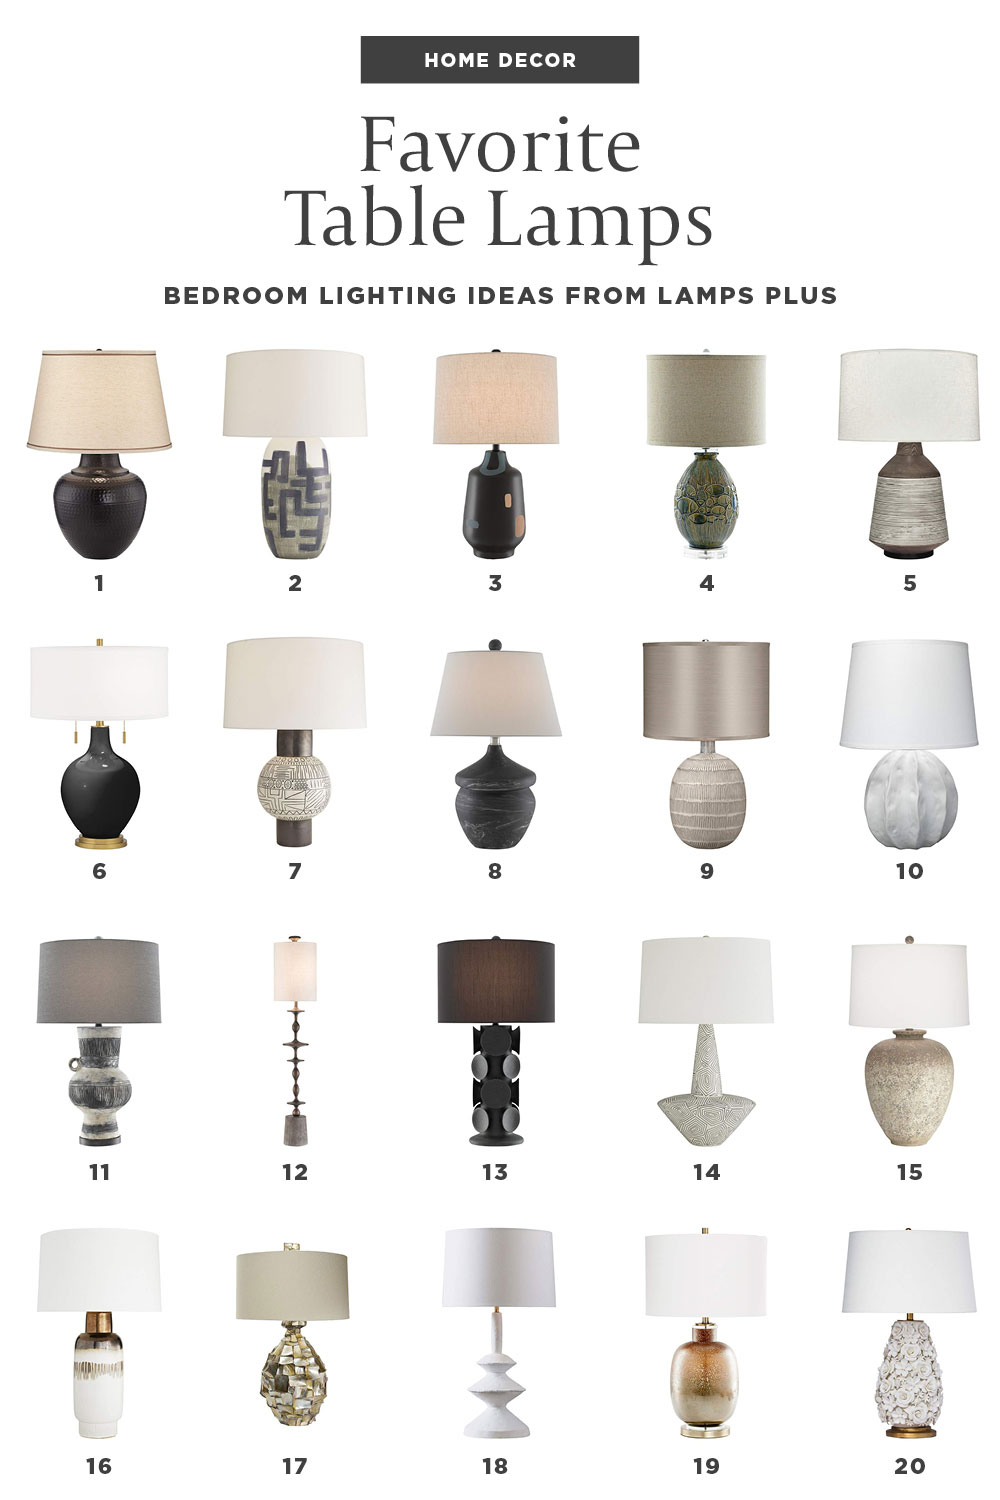 How To Choose The Best Bedroom Lighting - House Of Hipsters